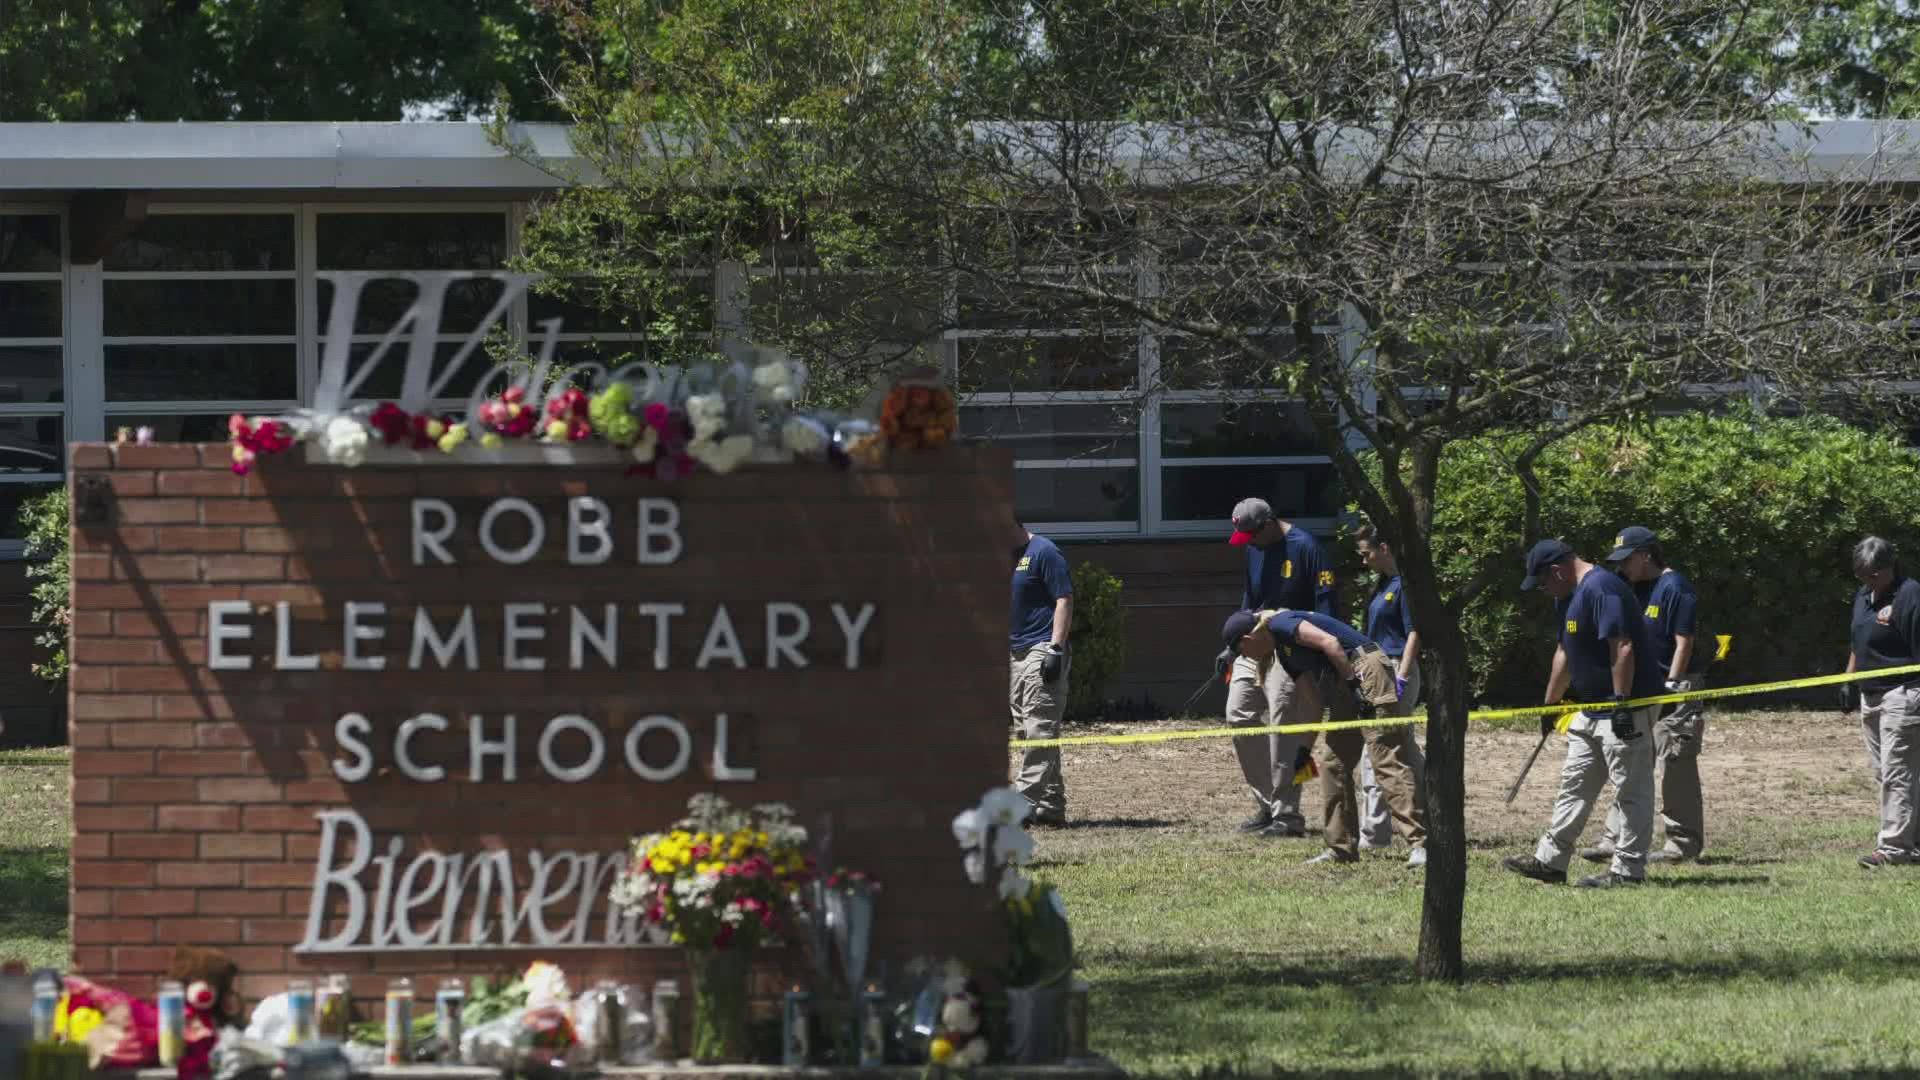 Three more funerals are scheduled Thursday for students killed at Robb Elementary School.